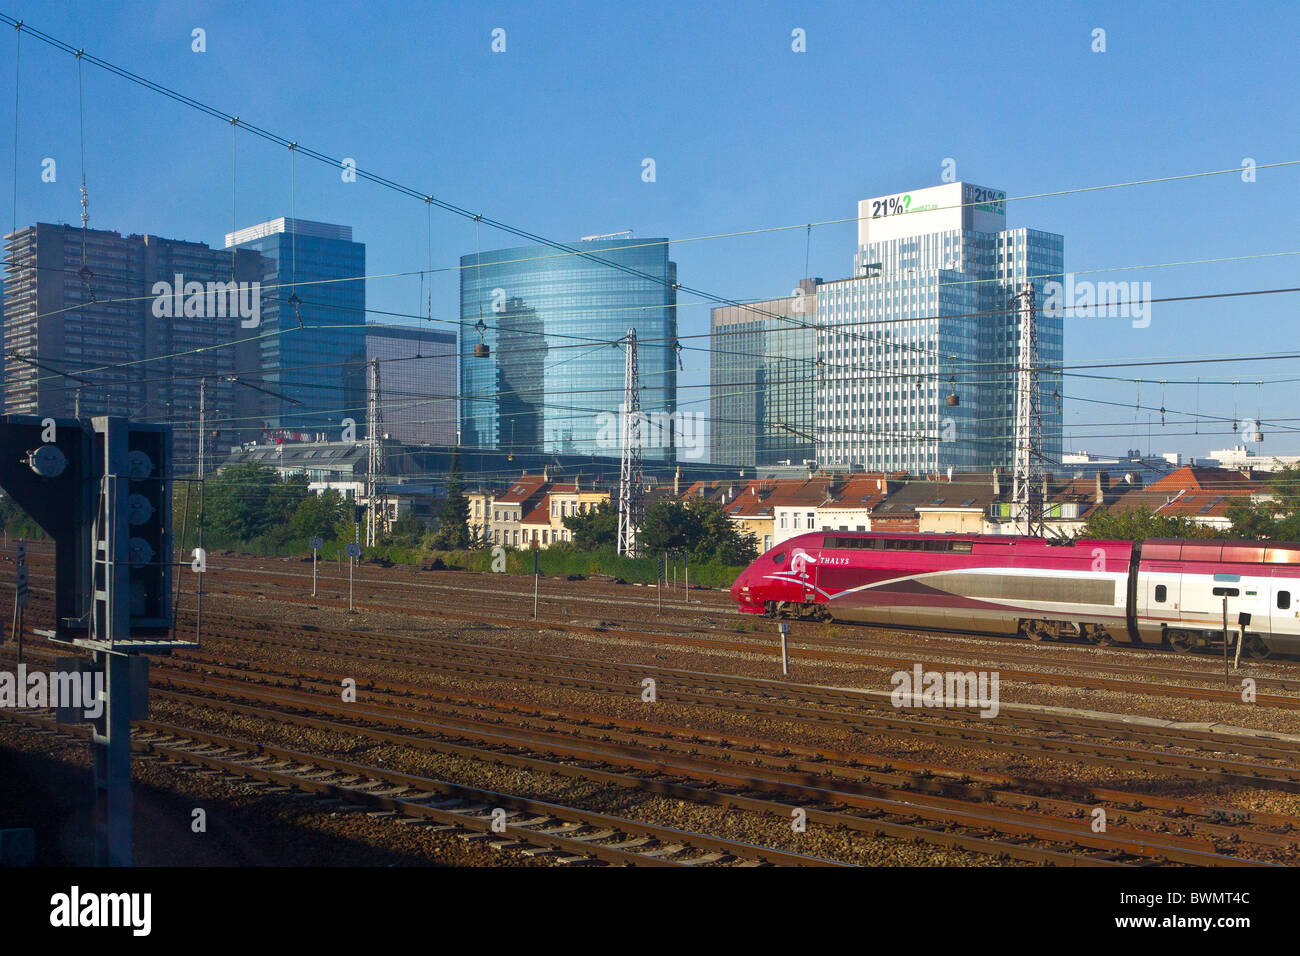 thalys arriving in brussels train high speed belgium city high rise buildings offices rail railway transport public infrastructu Stock Photo